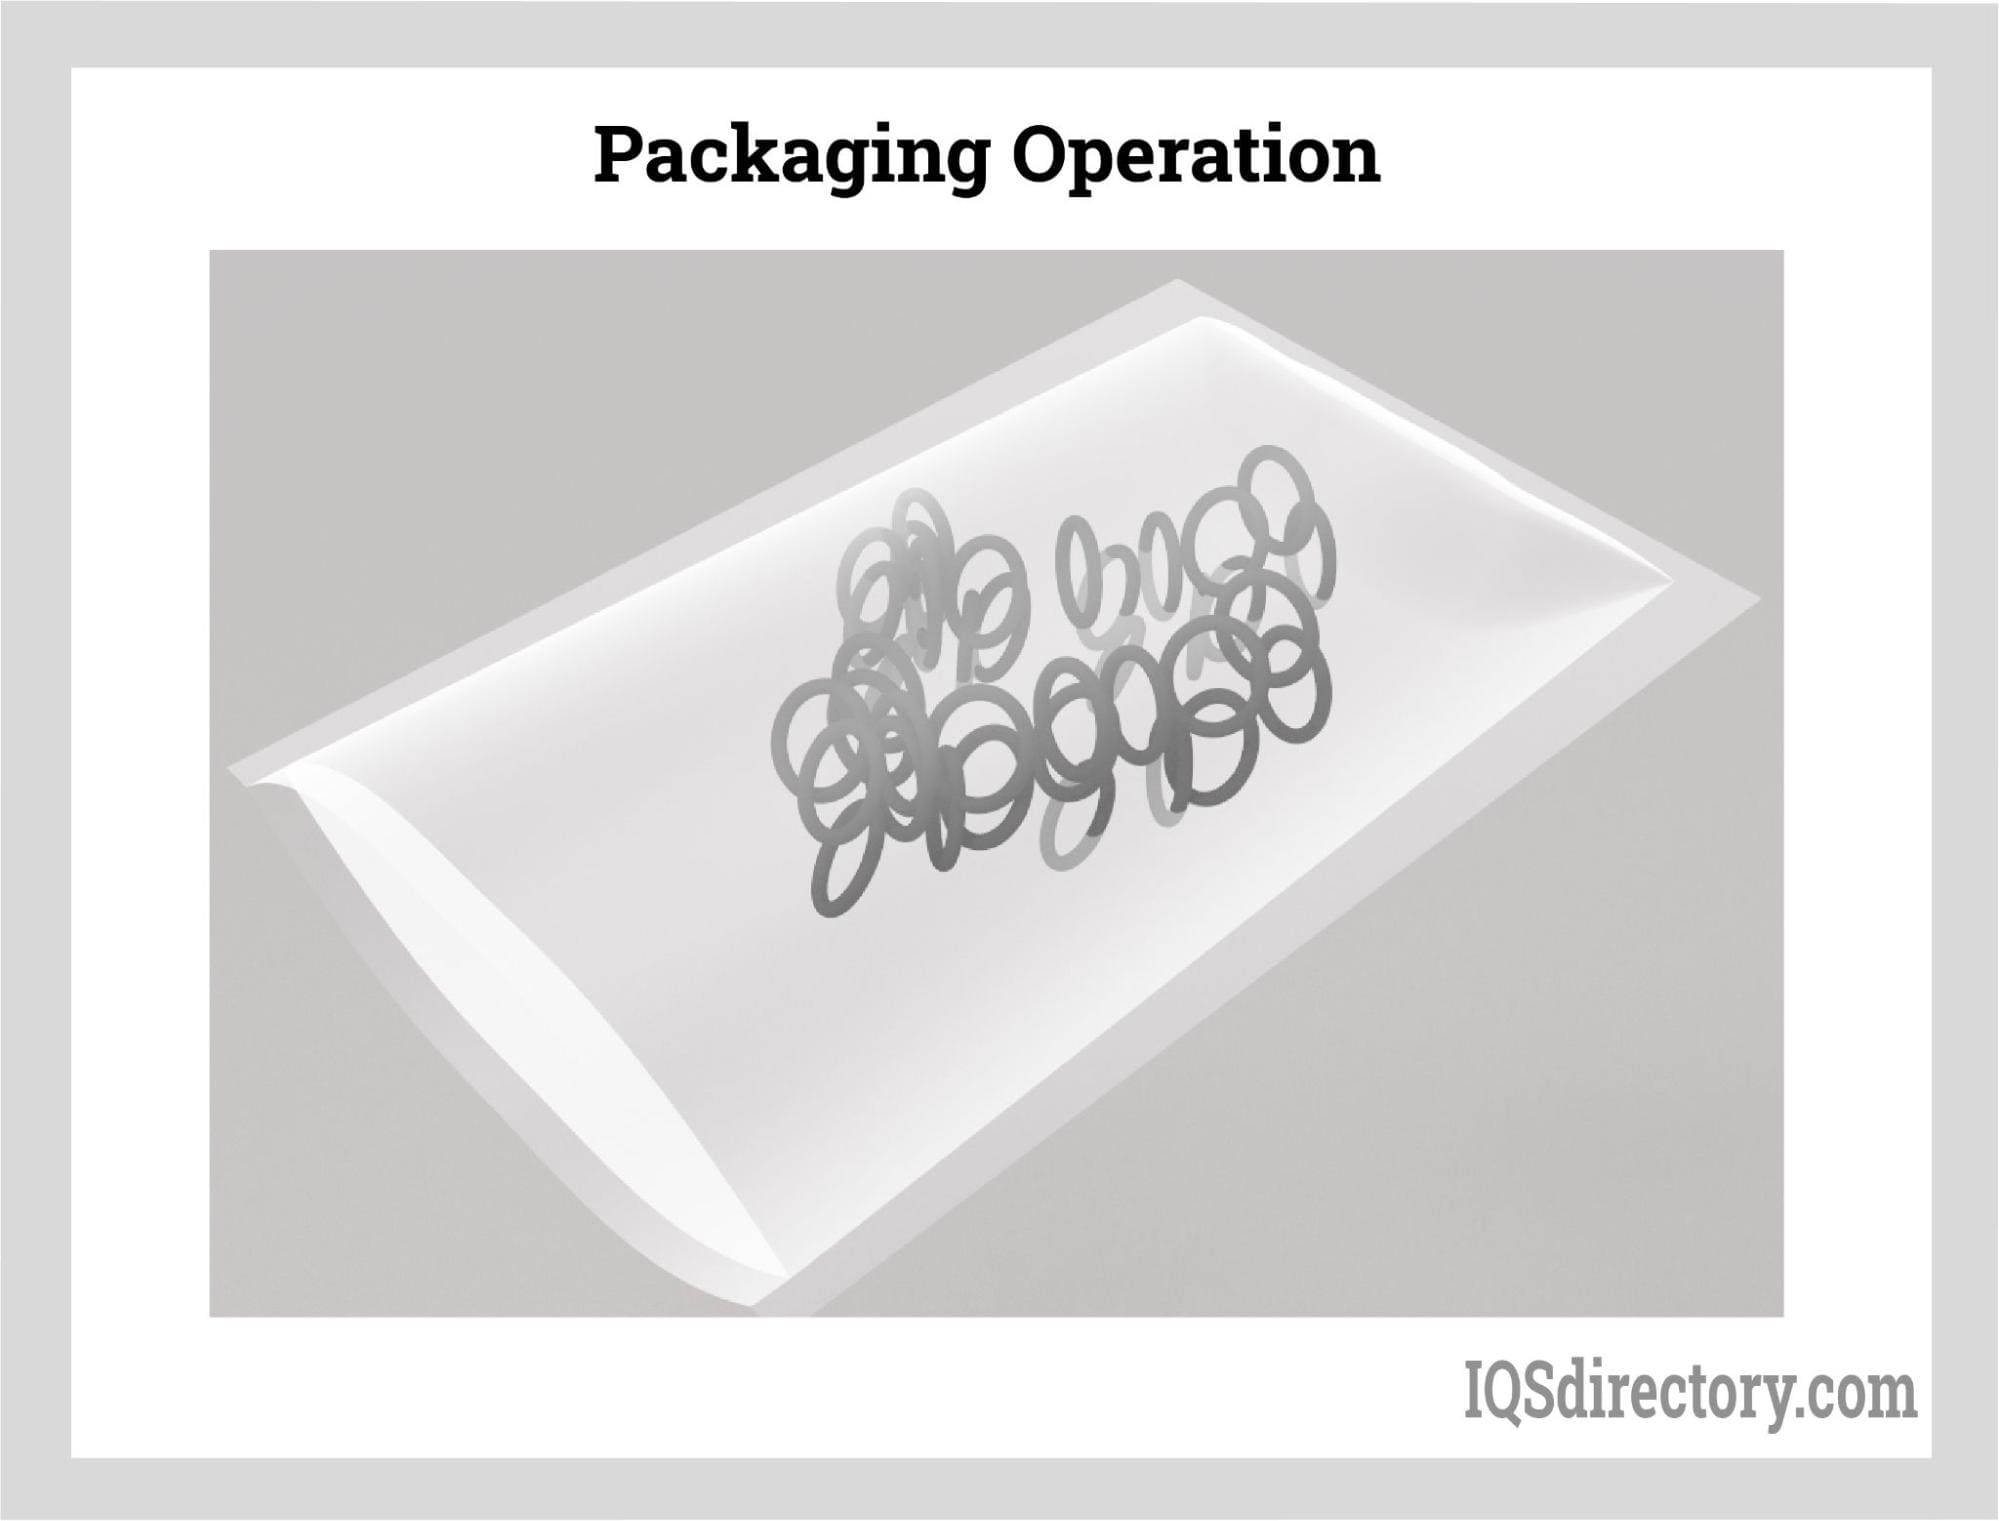 Packaging Operation